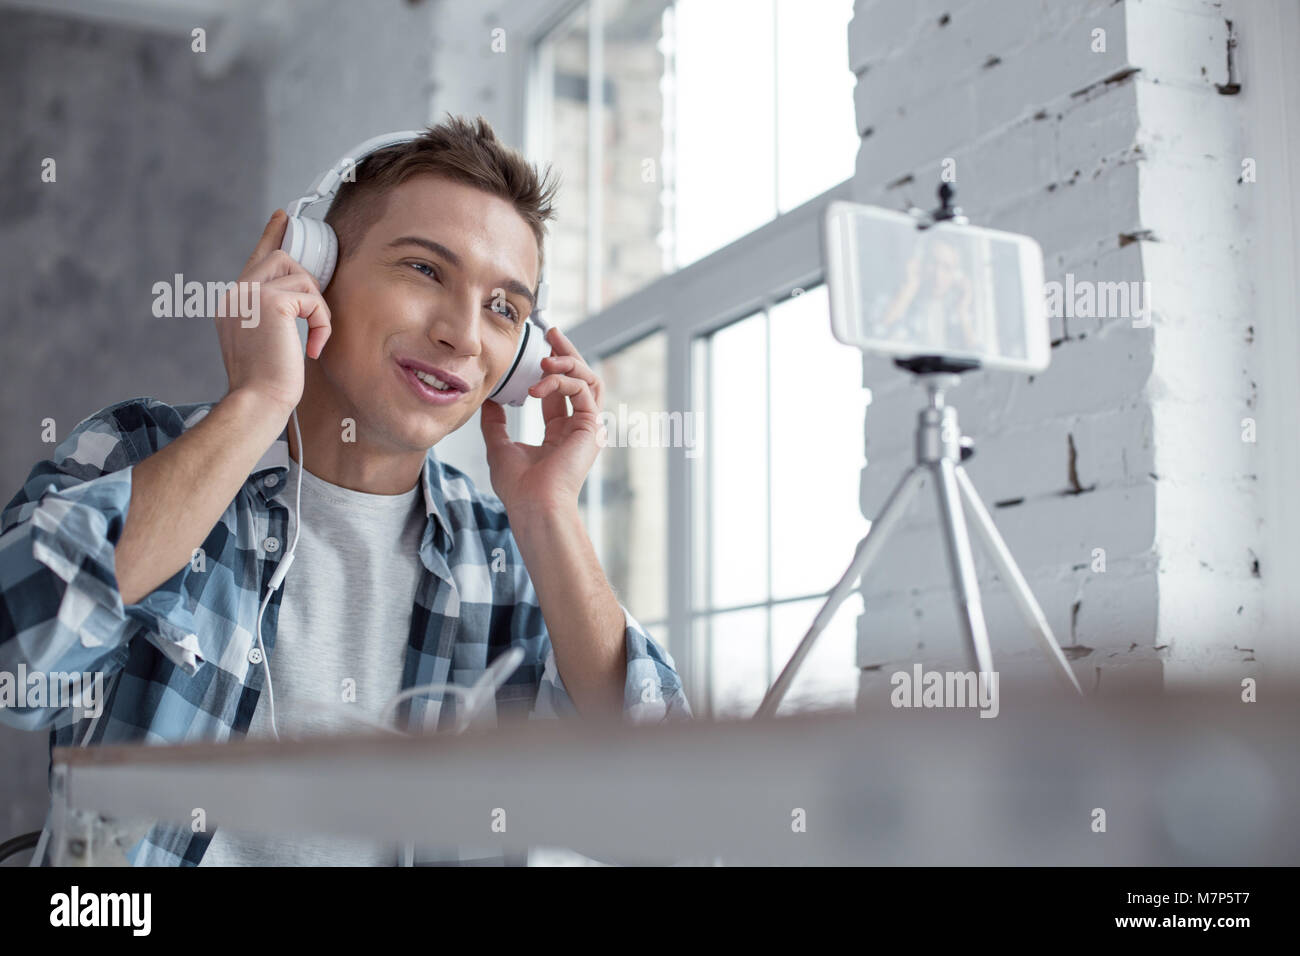 Delighted vlogger wearing great headphones Stock Photo